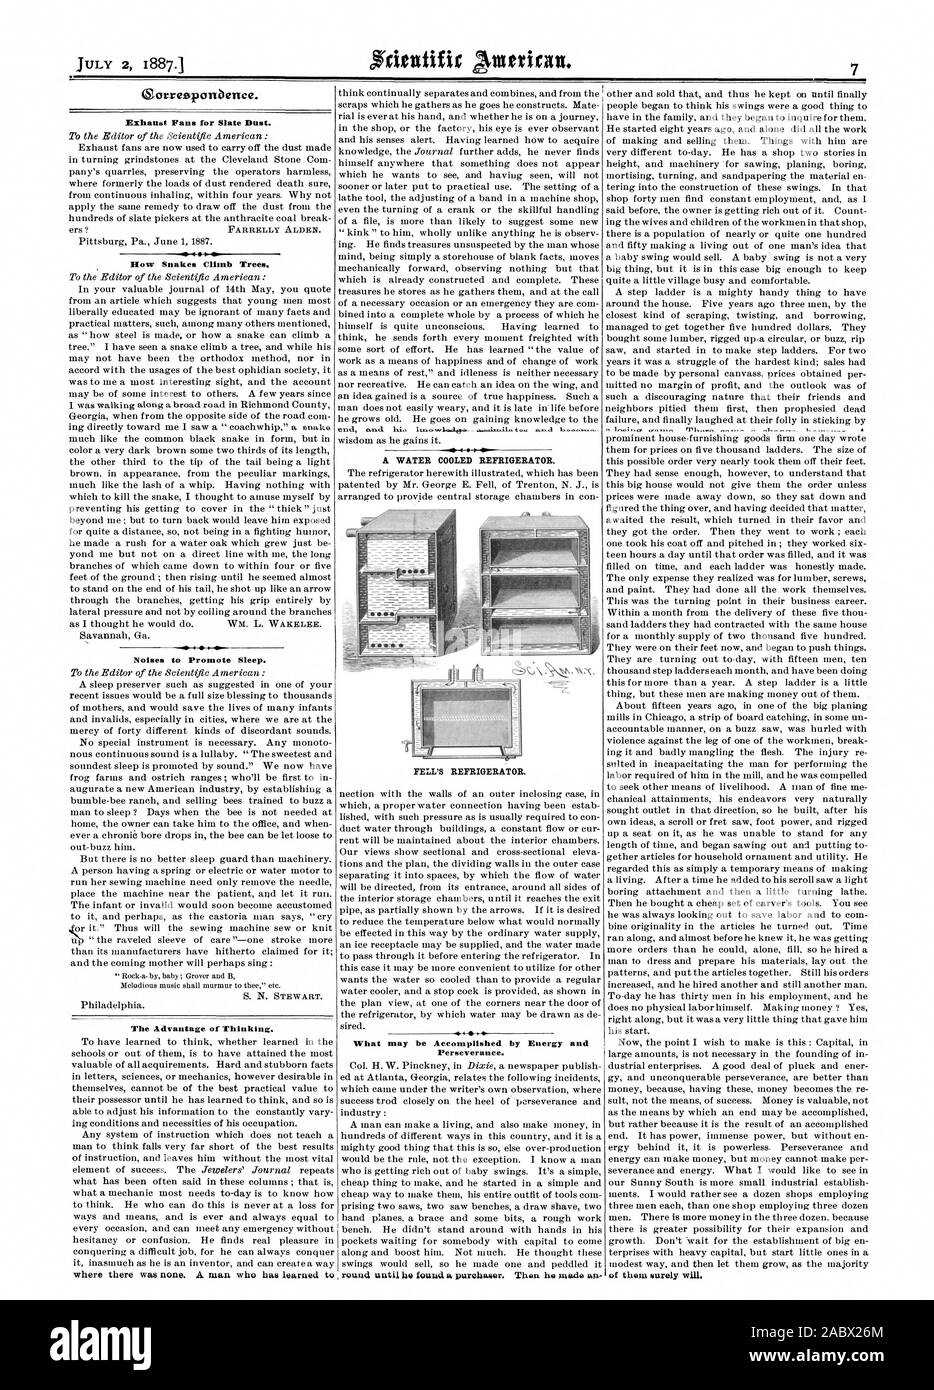 Oorreepanbence. Exhaust Fans for Slate Dust. How Snakes Climb Trees. Noises to Promote Sleep. The Advantage of Thinking. where there was none. A man who has learned t A WATER COOLED REFRIGERATOR. FELL'S REFRIGERATOR. Perseverance. round until he found a purchaser. When he ;nada an, scientific american, 1887-07-02 Stock Photo